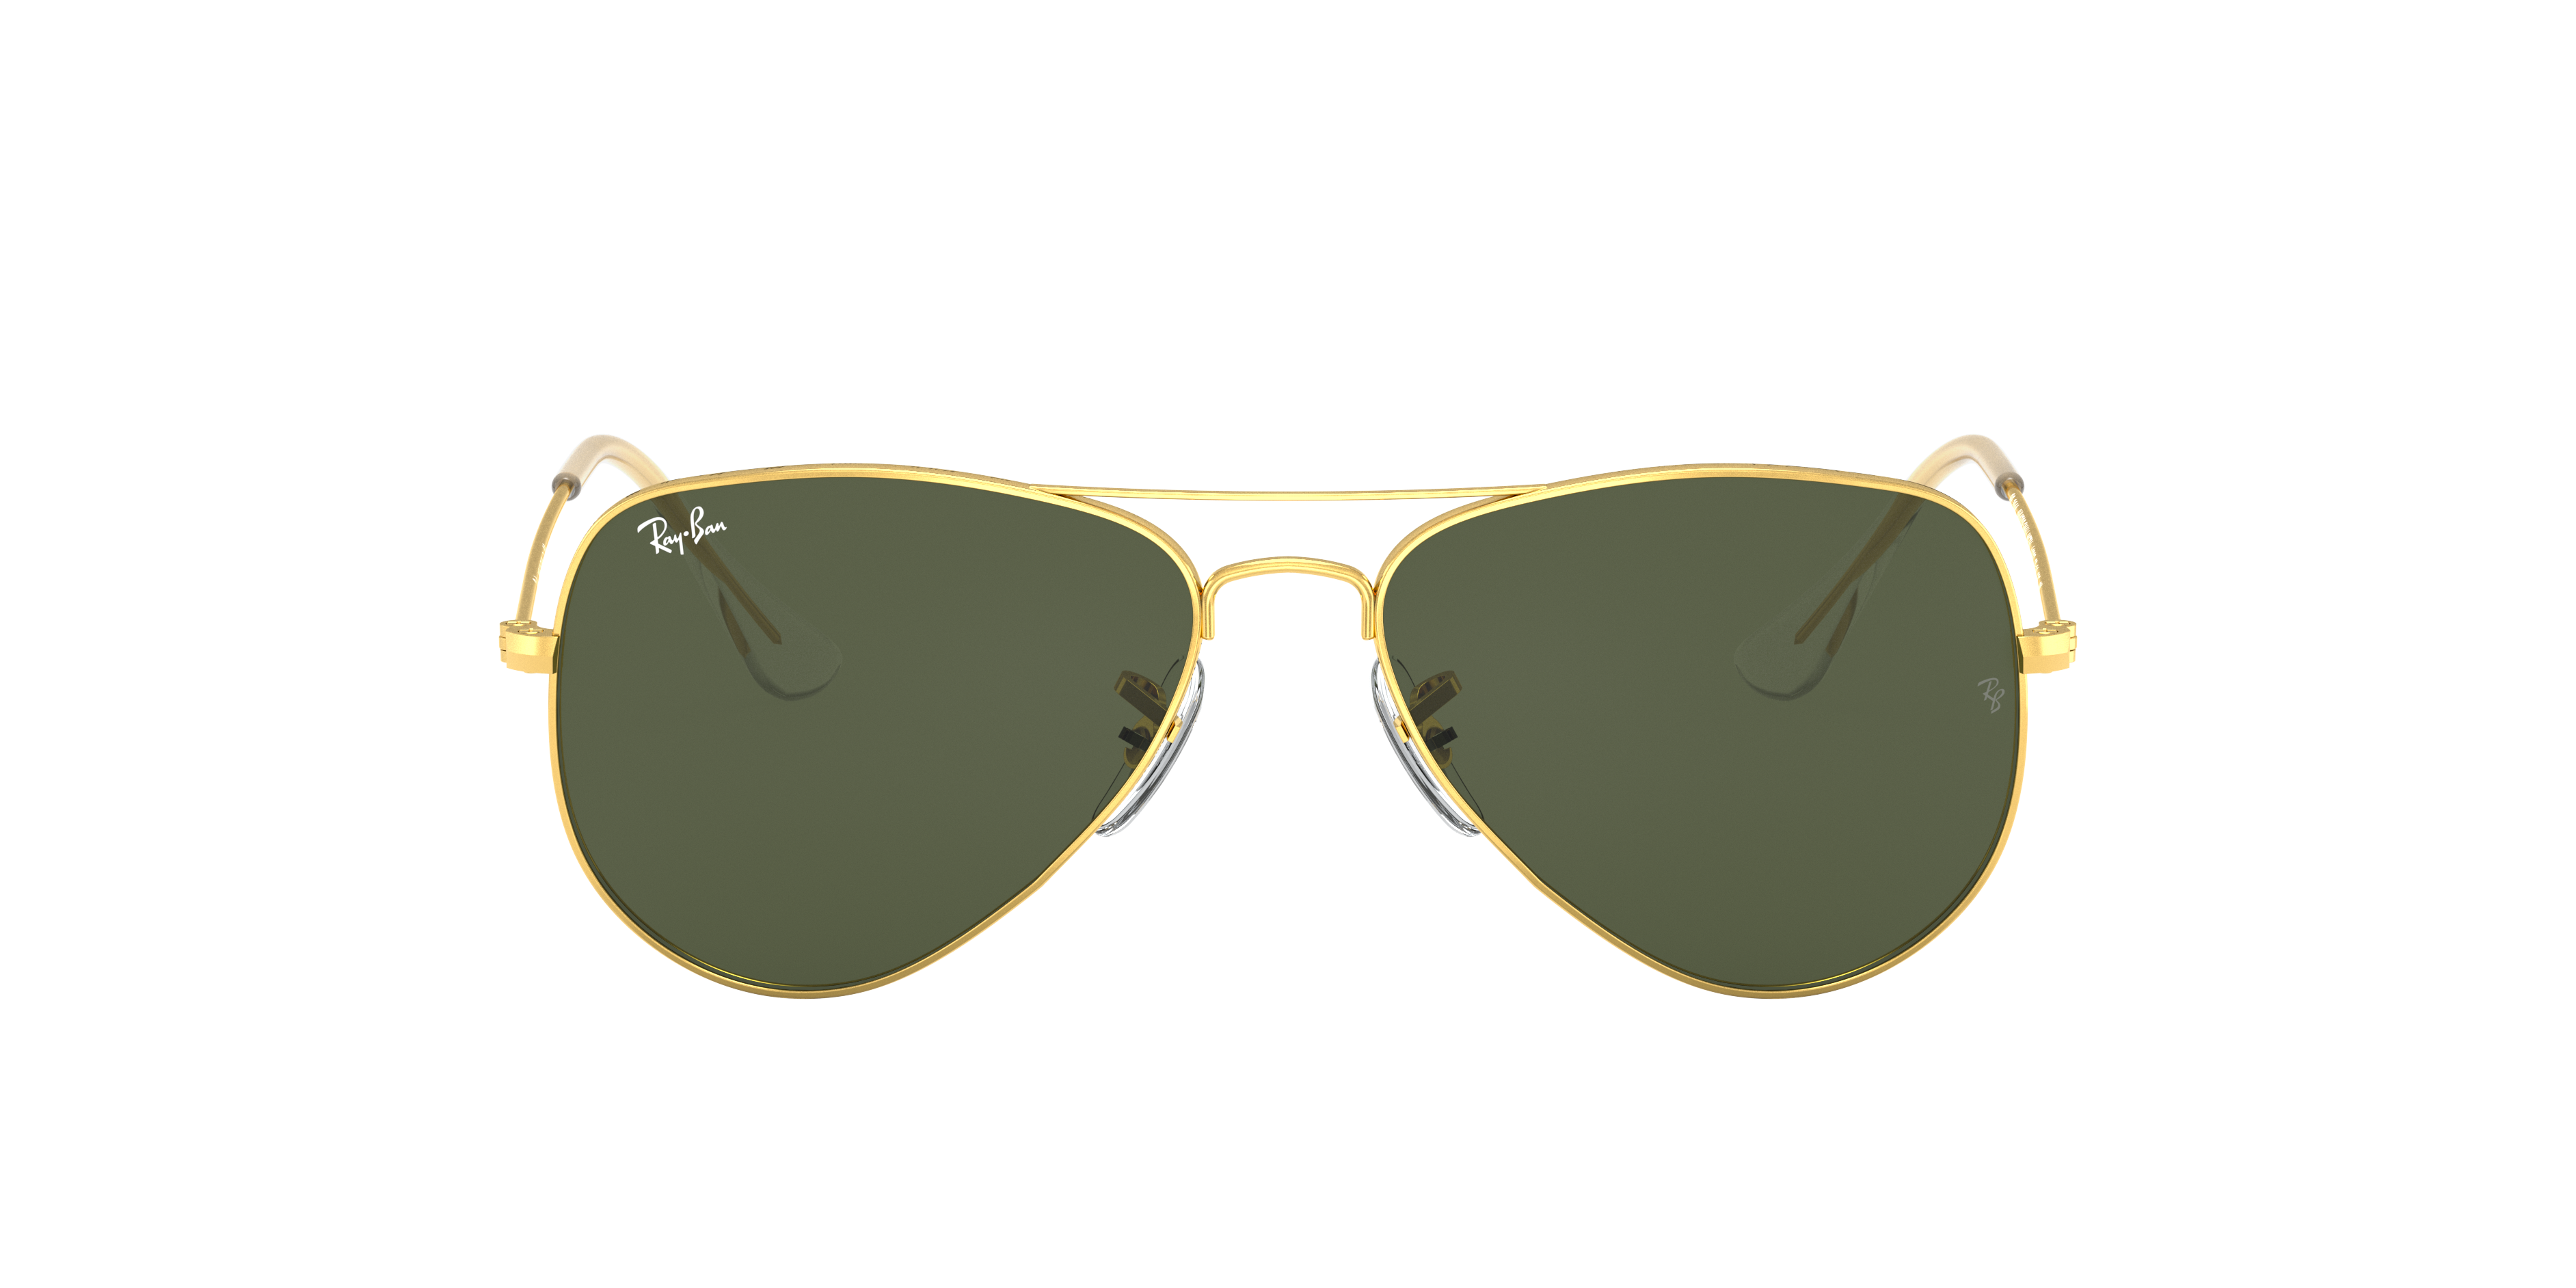 Boutique officielle Ray-Ban® France